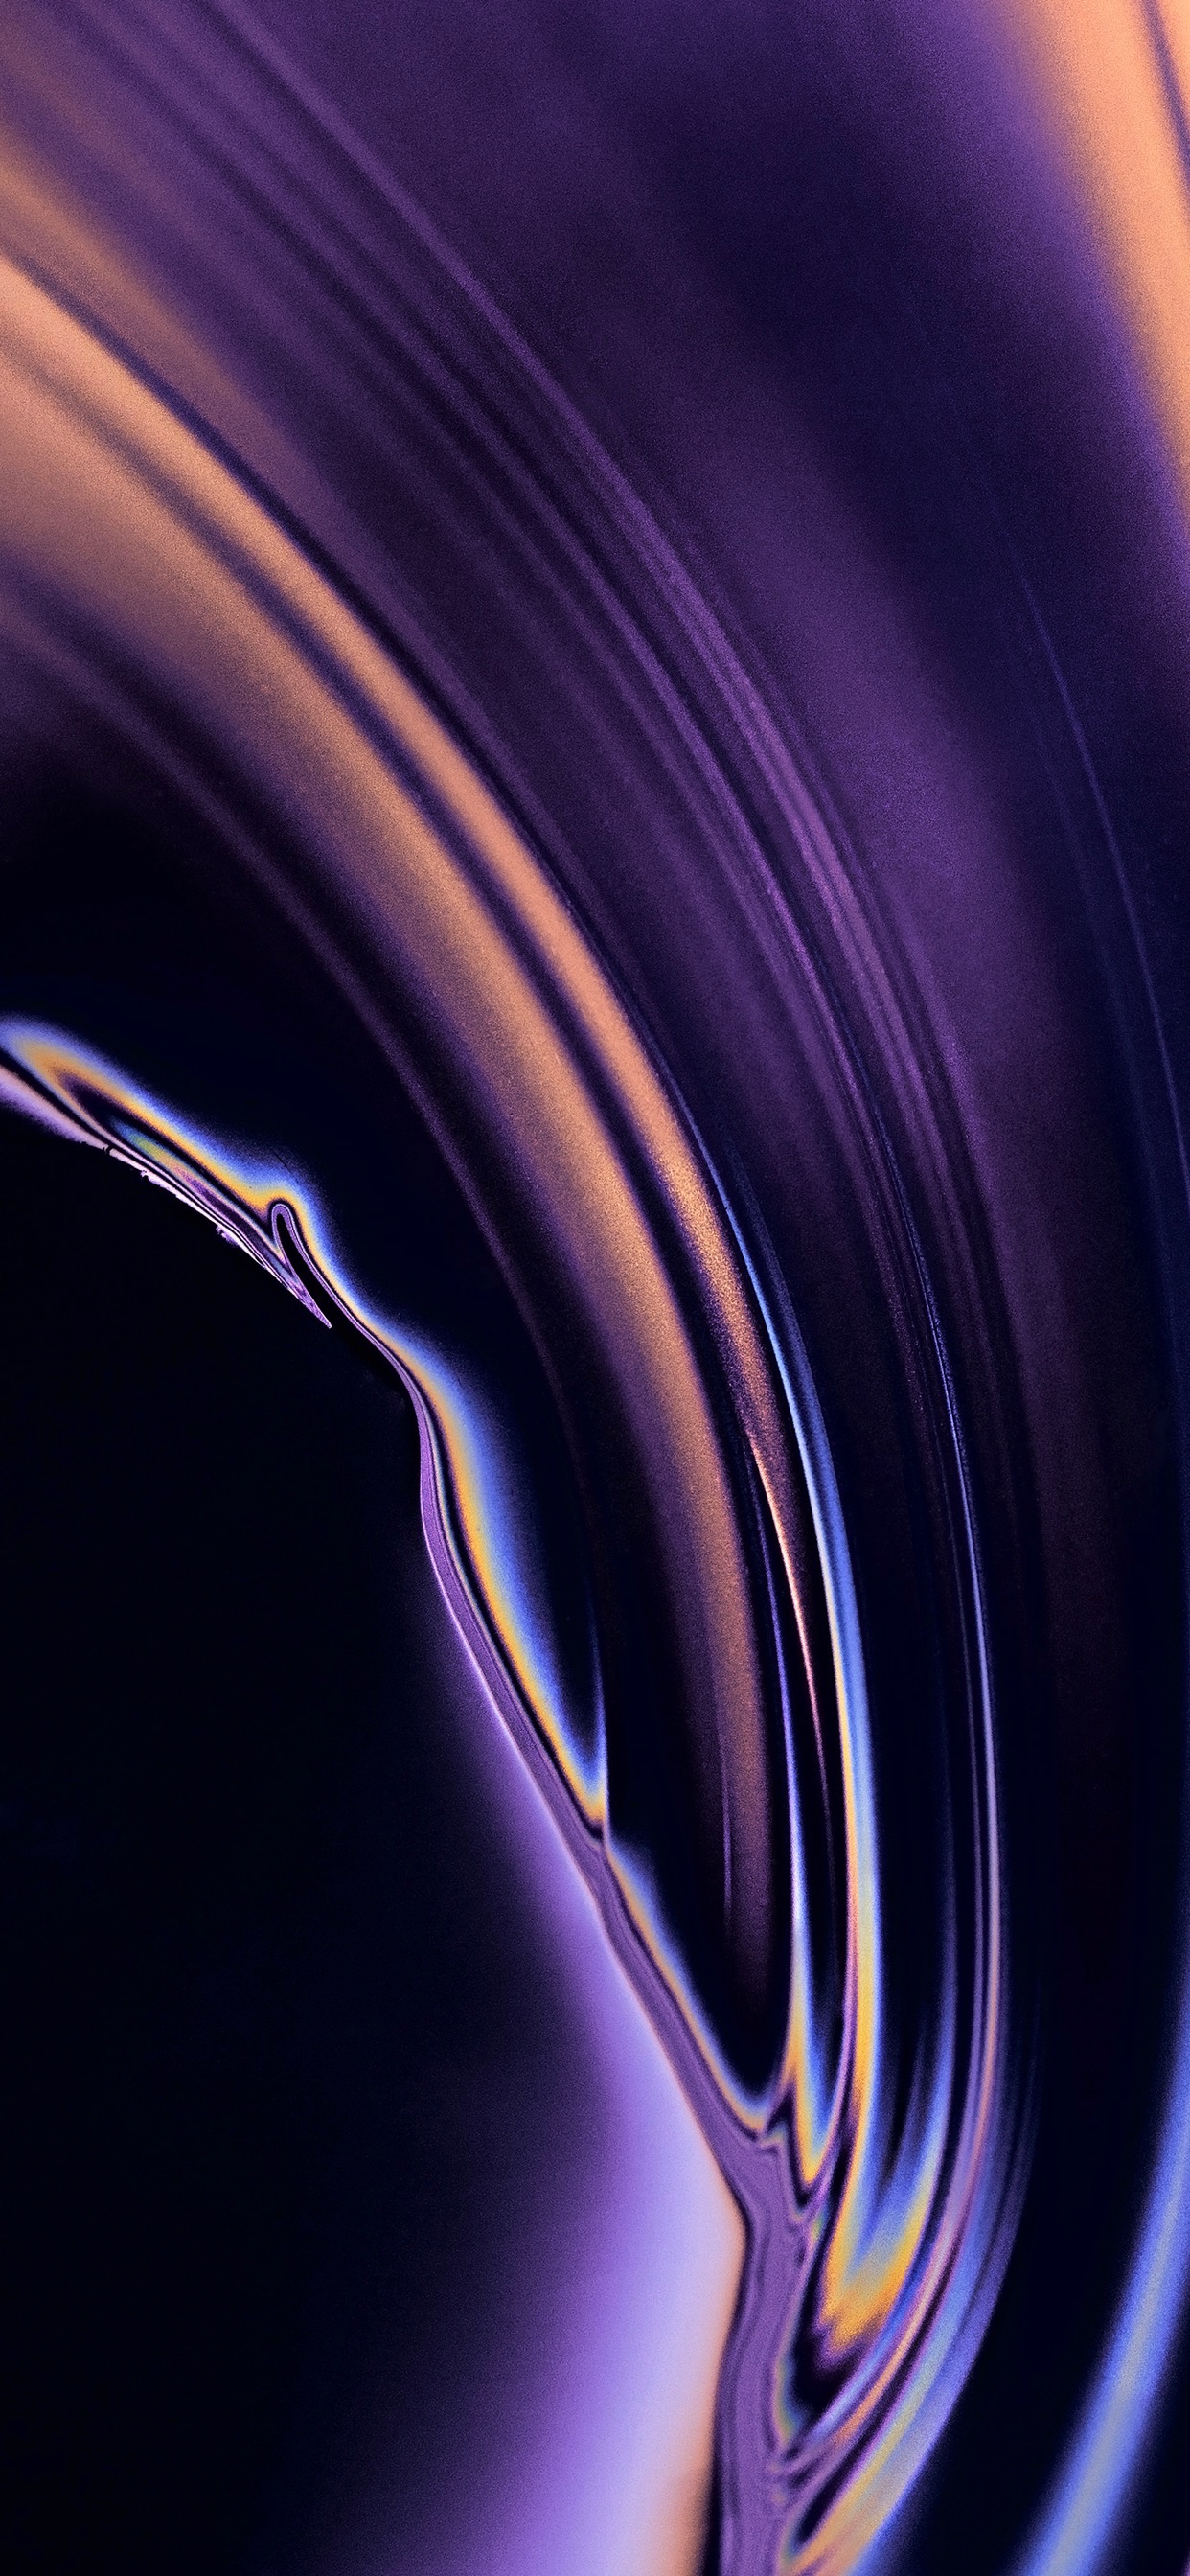 Wallpaper Weekends: Abstract iPhone Wallpapers From the macOS Desktop Pictures Folder